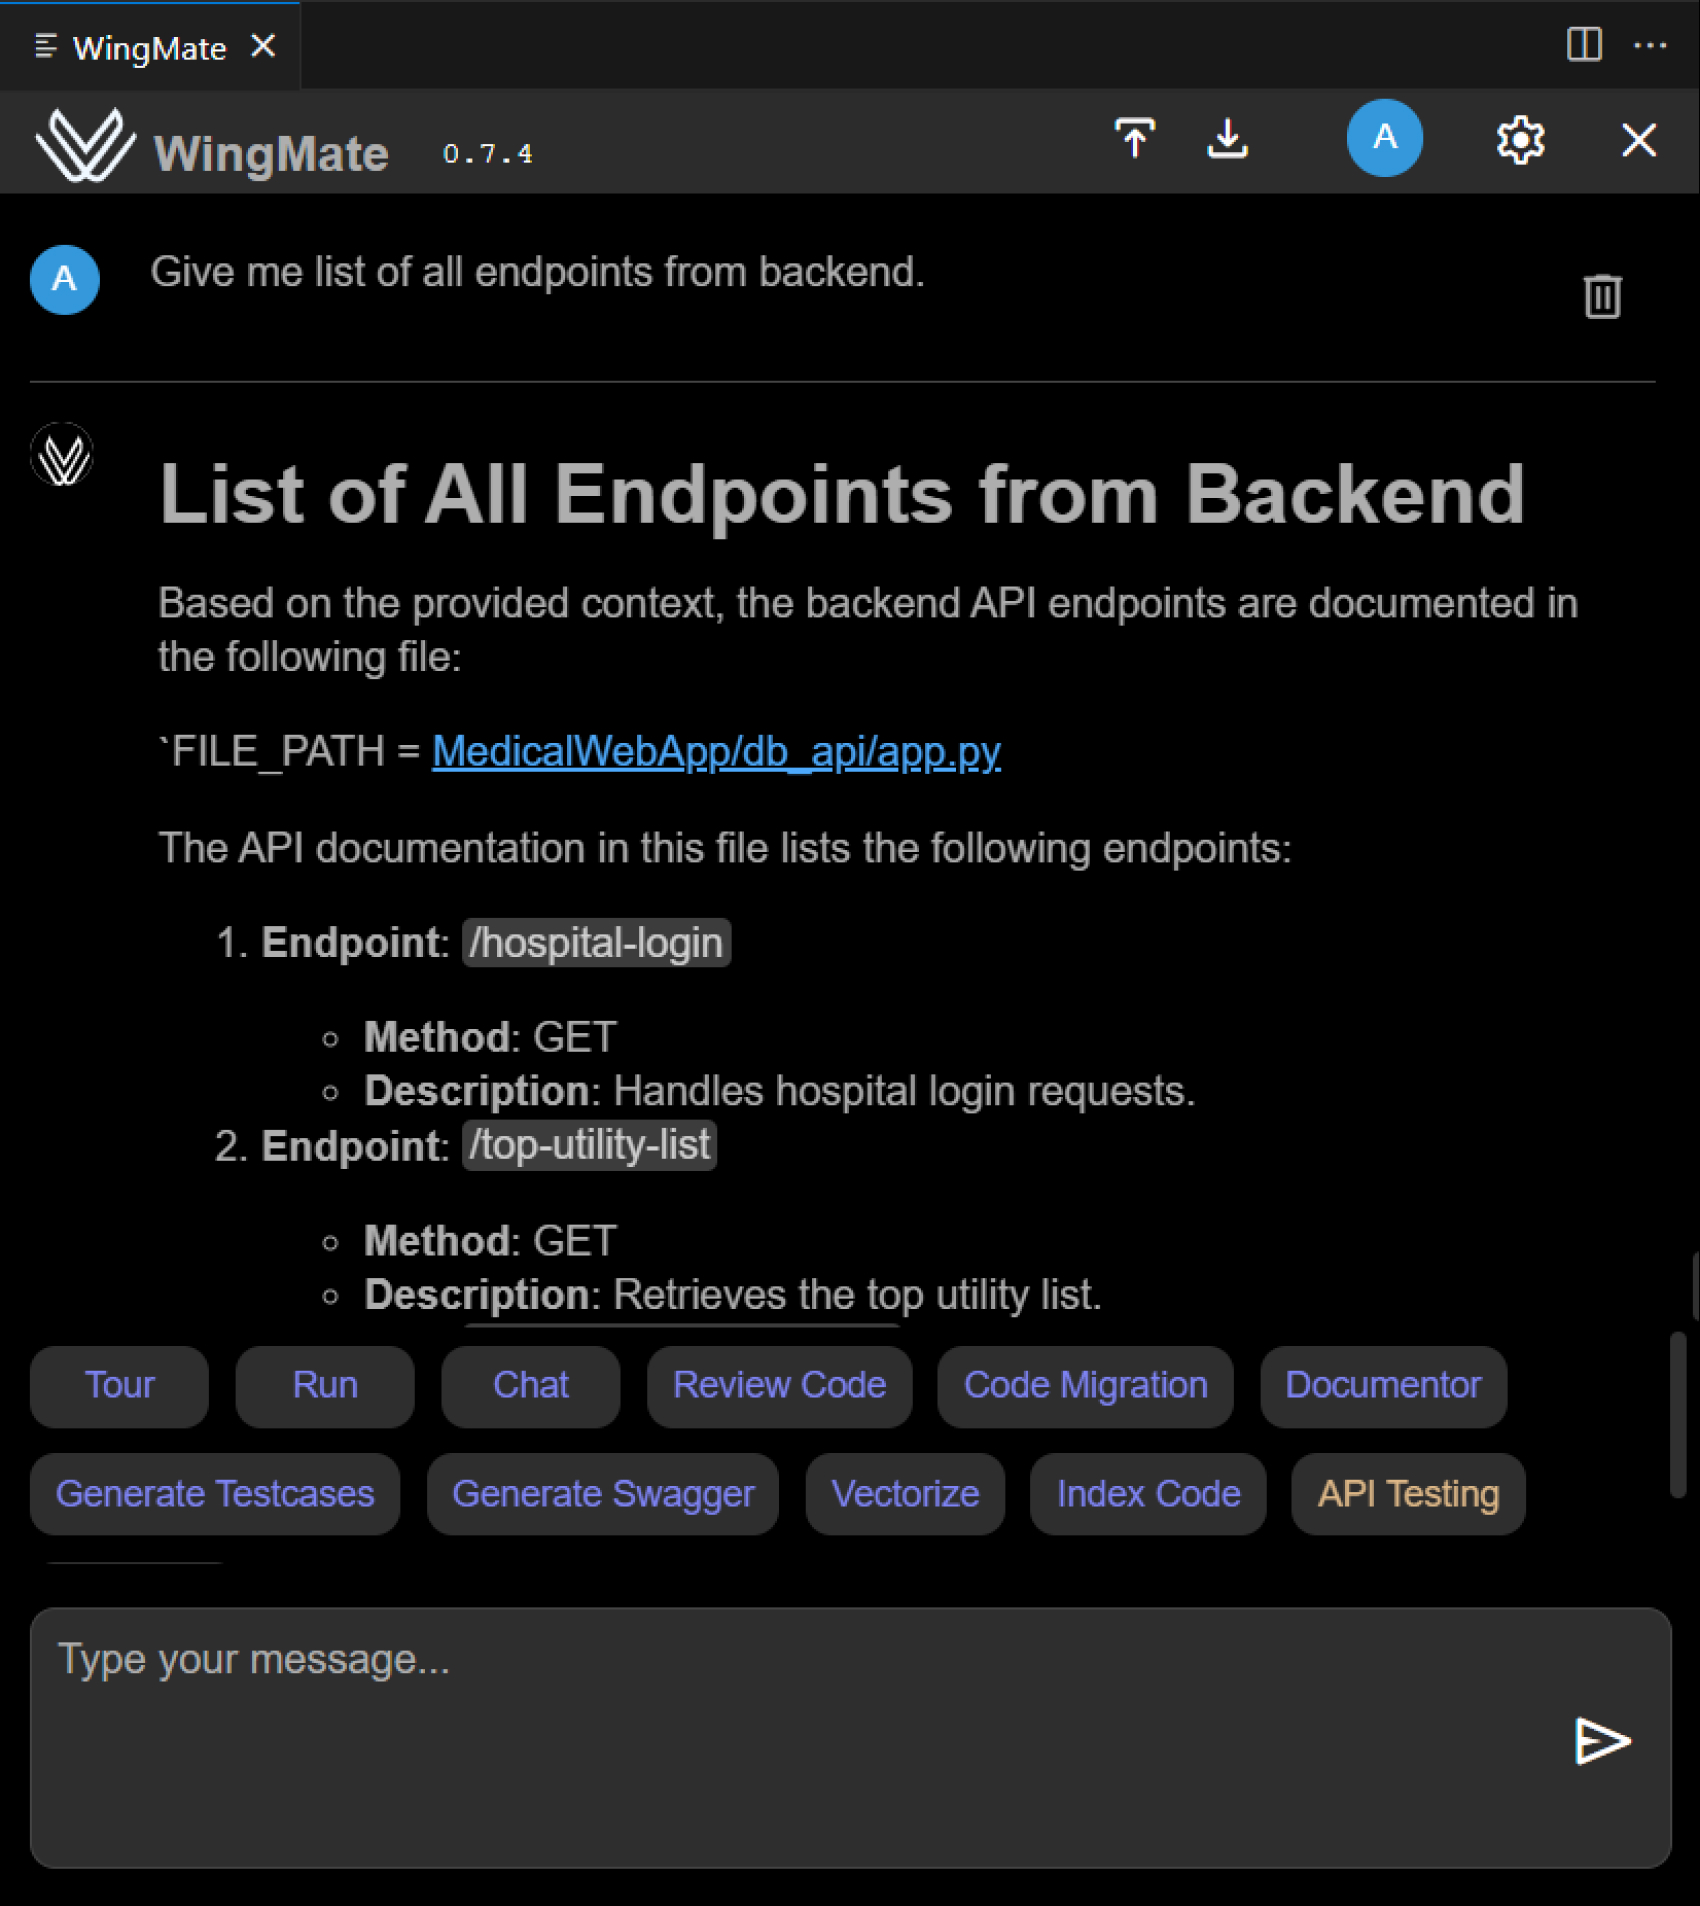 WingMate lists out all backend endpoints